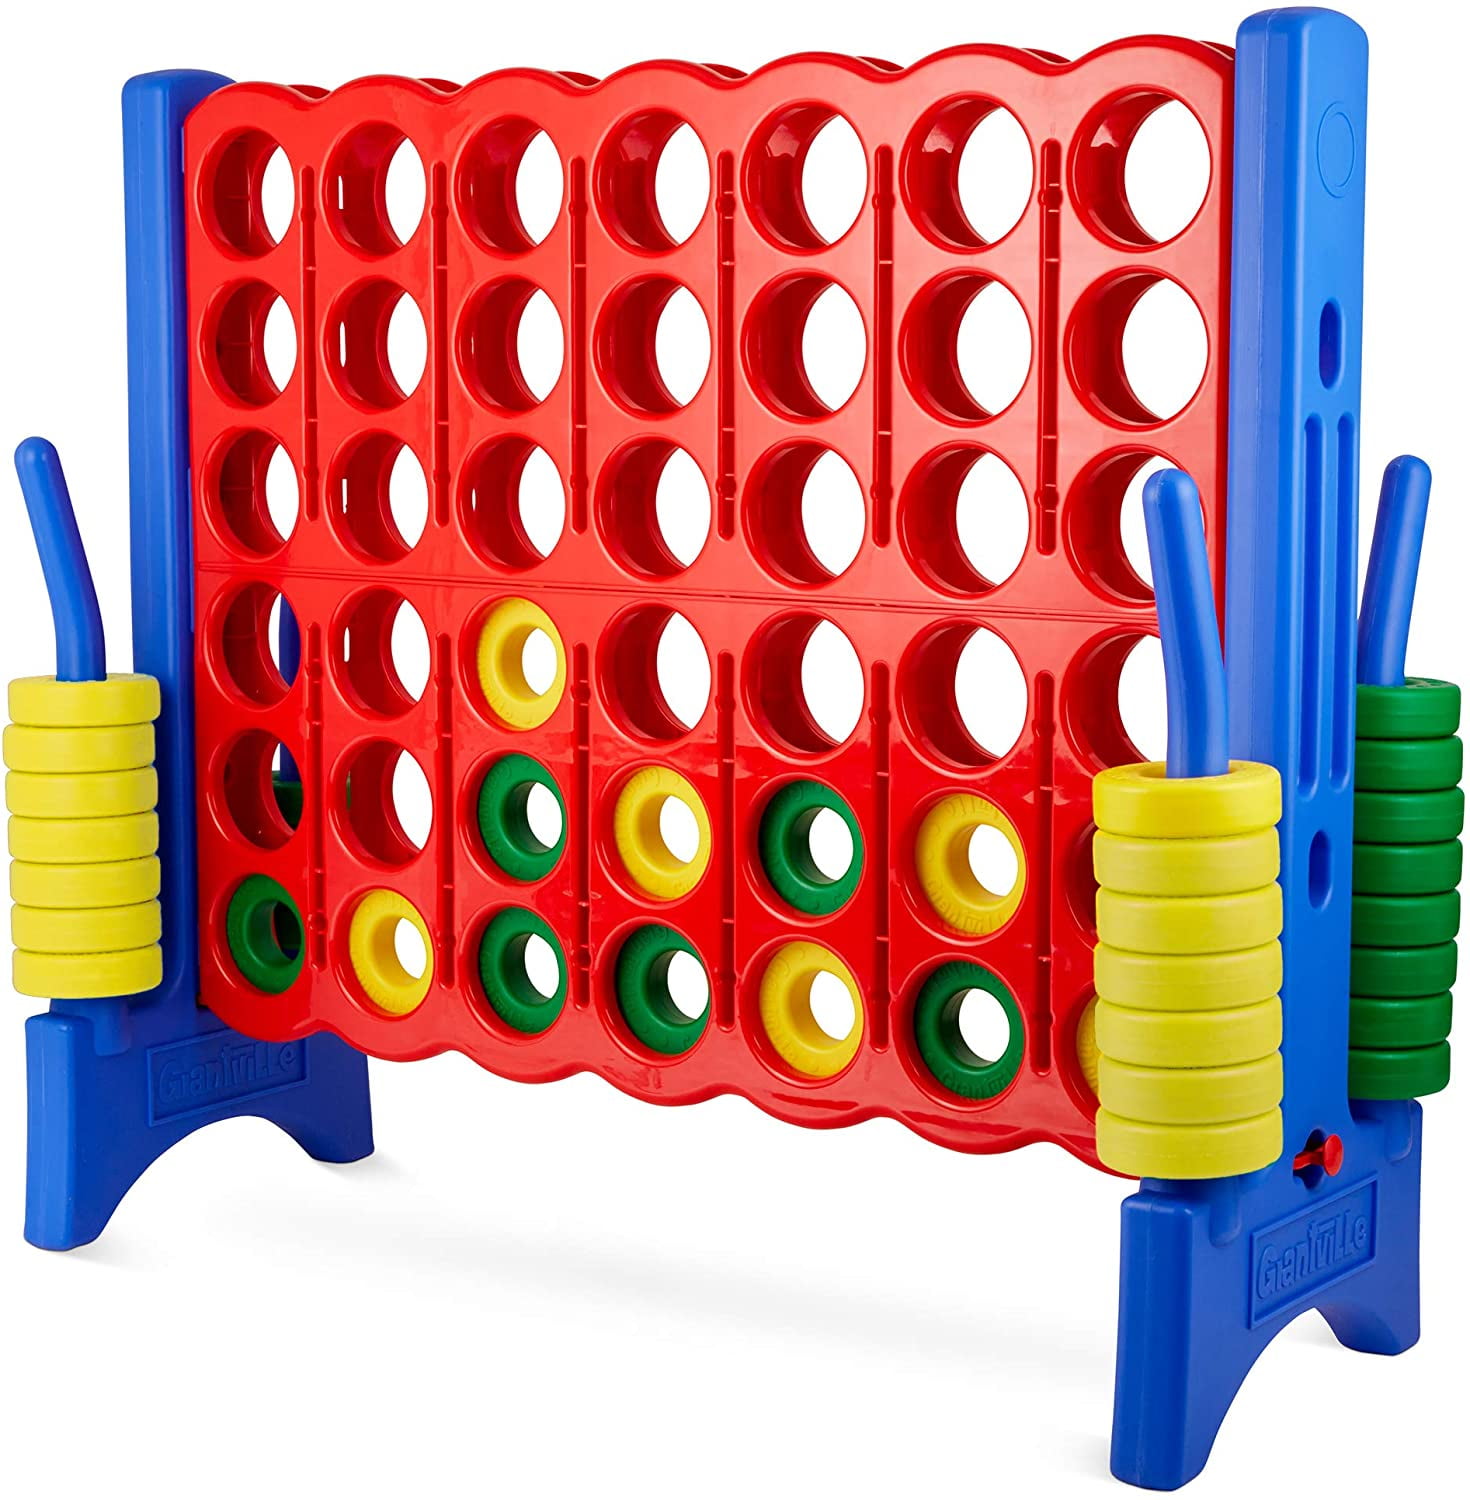 Giant 4 in a Row Connect Game – 4 Feet Wide by 3.5 Feet Tall Oversized